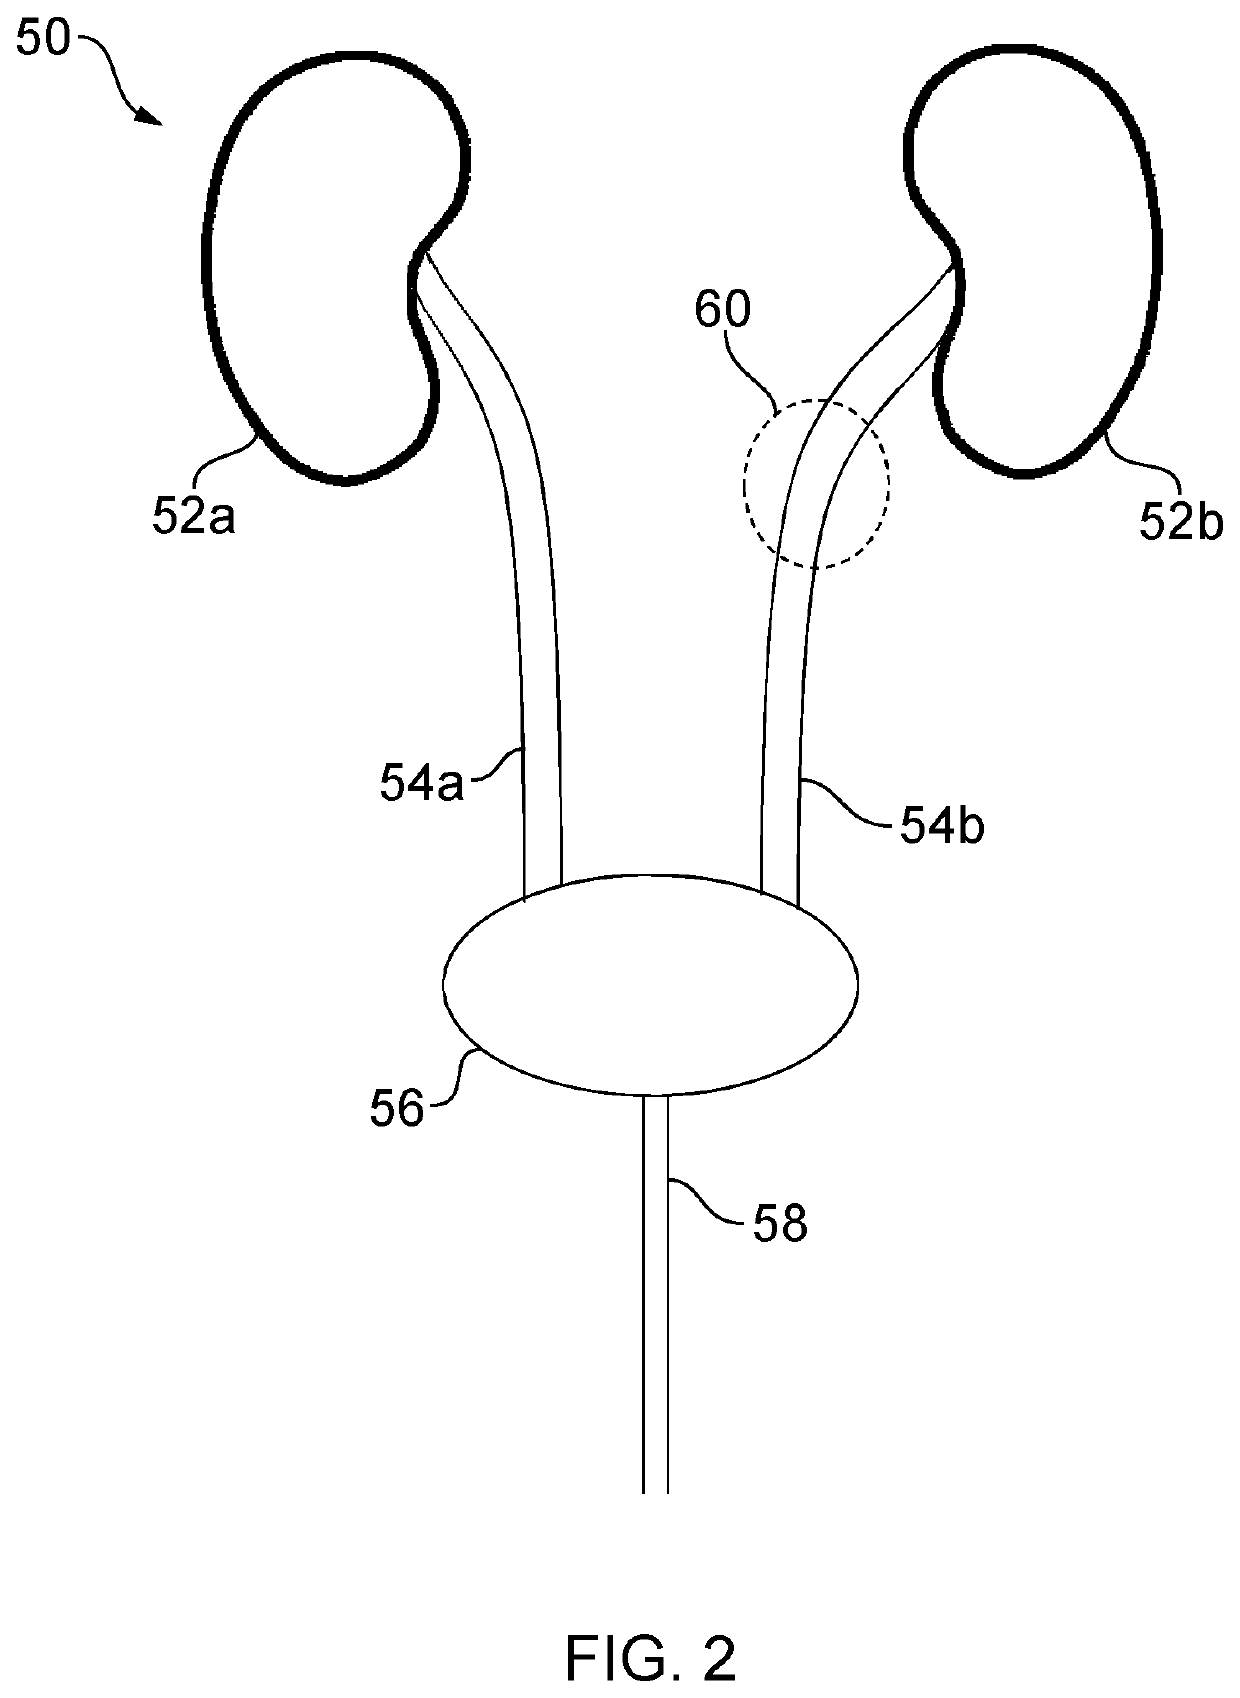 Apparatus for treating urinary tract infections